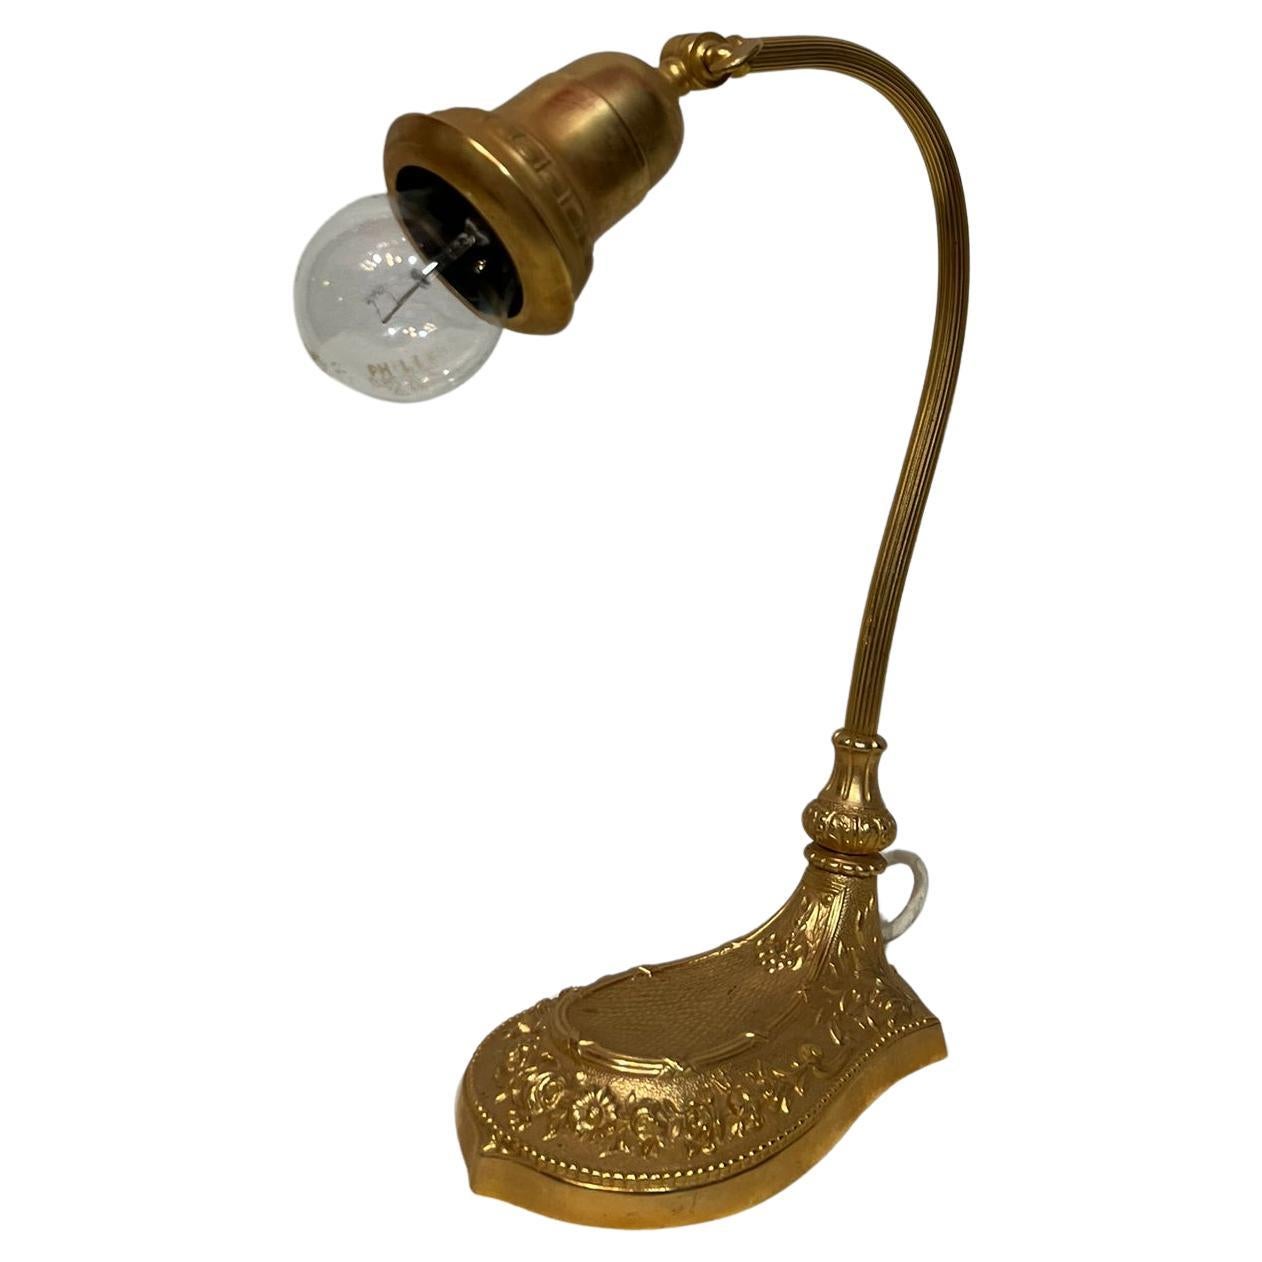 High quality French desk lamp end of the 19th century